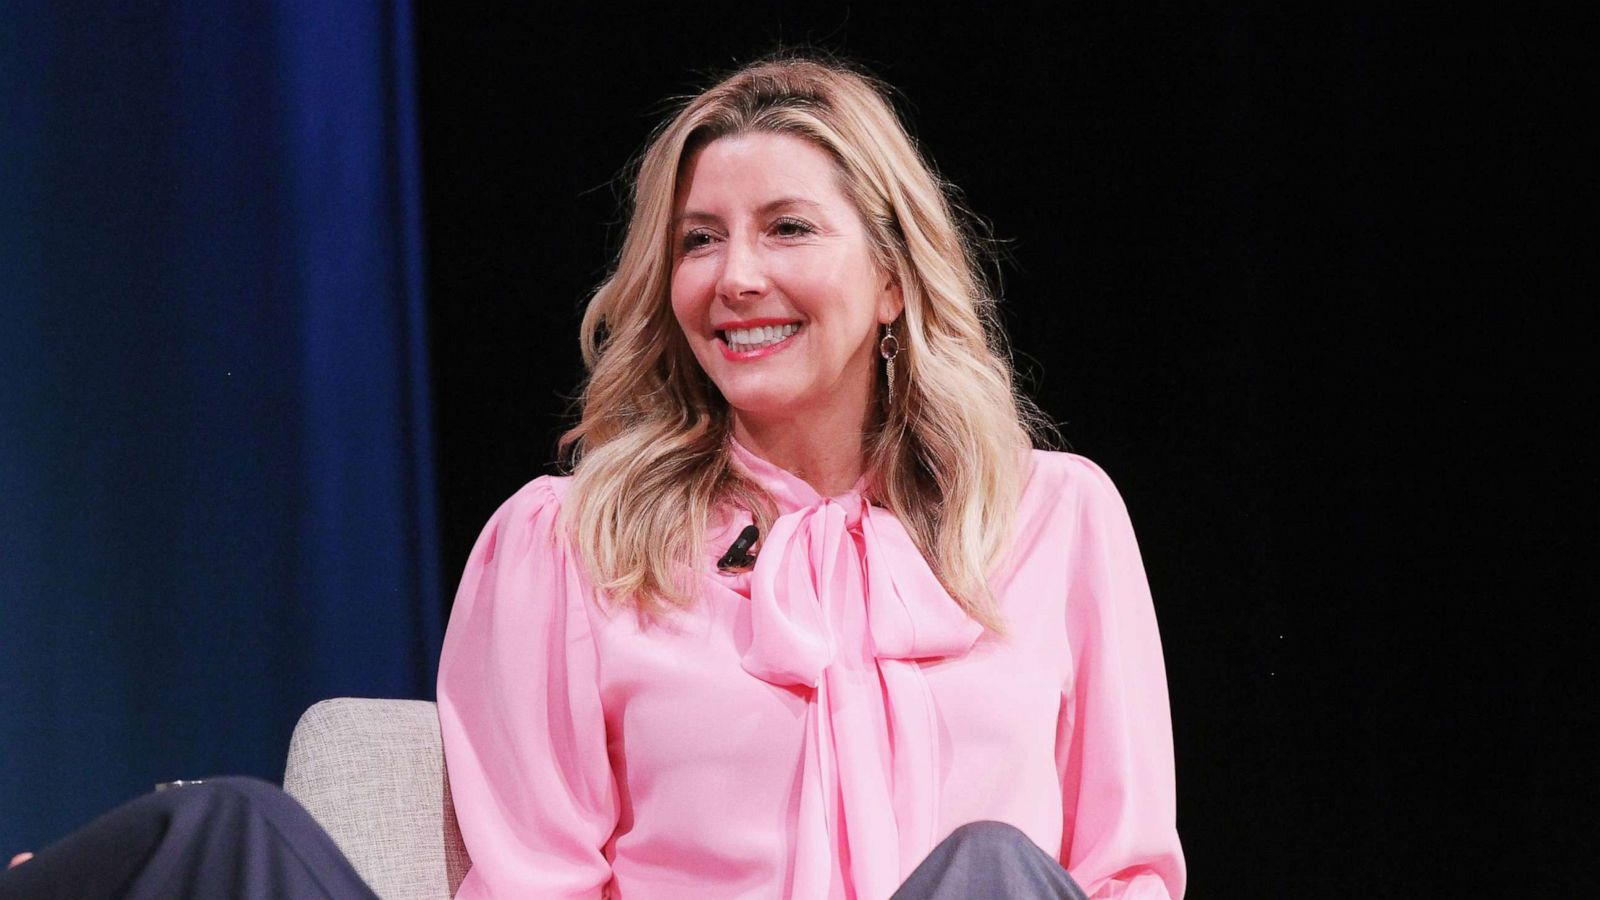 Spanx Founder Sara Blakely Shares Her Best Advice For